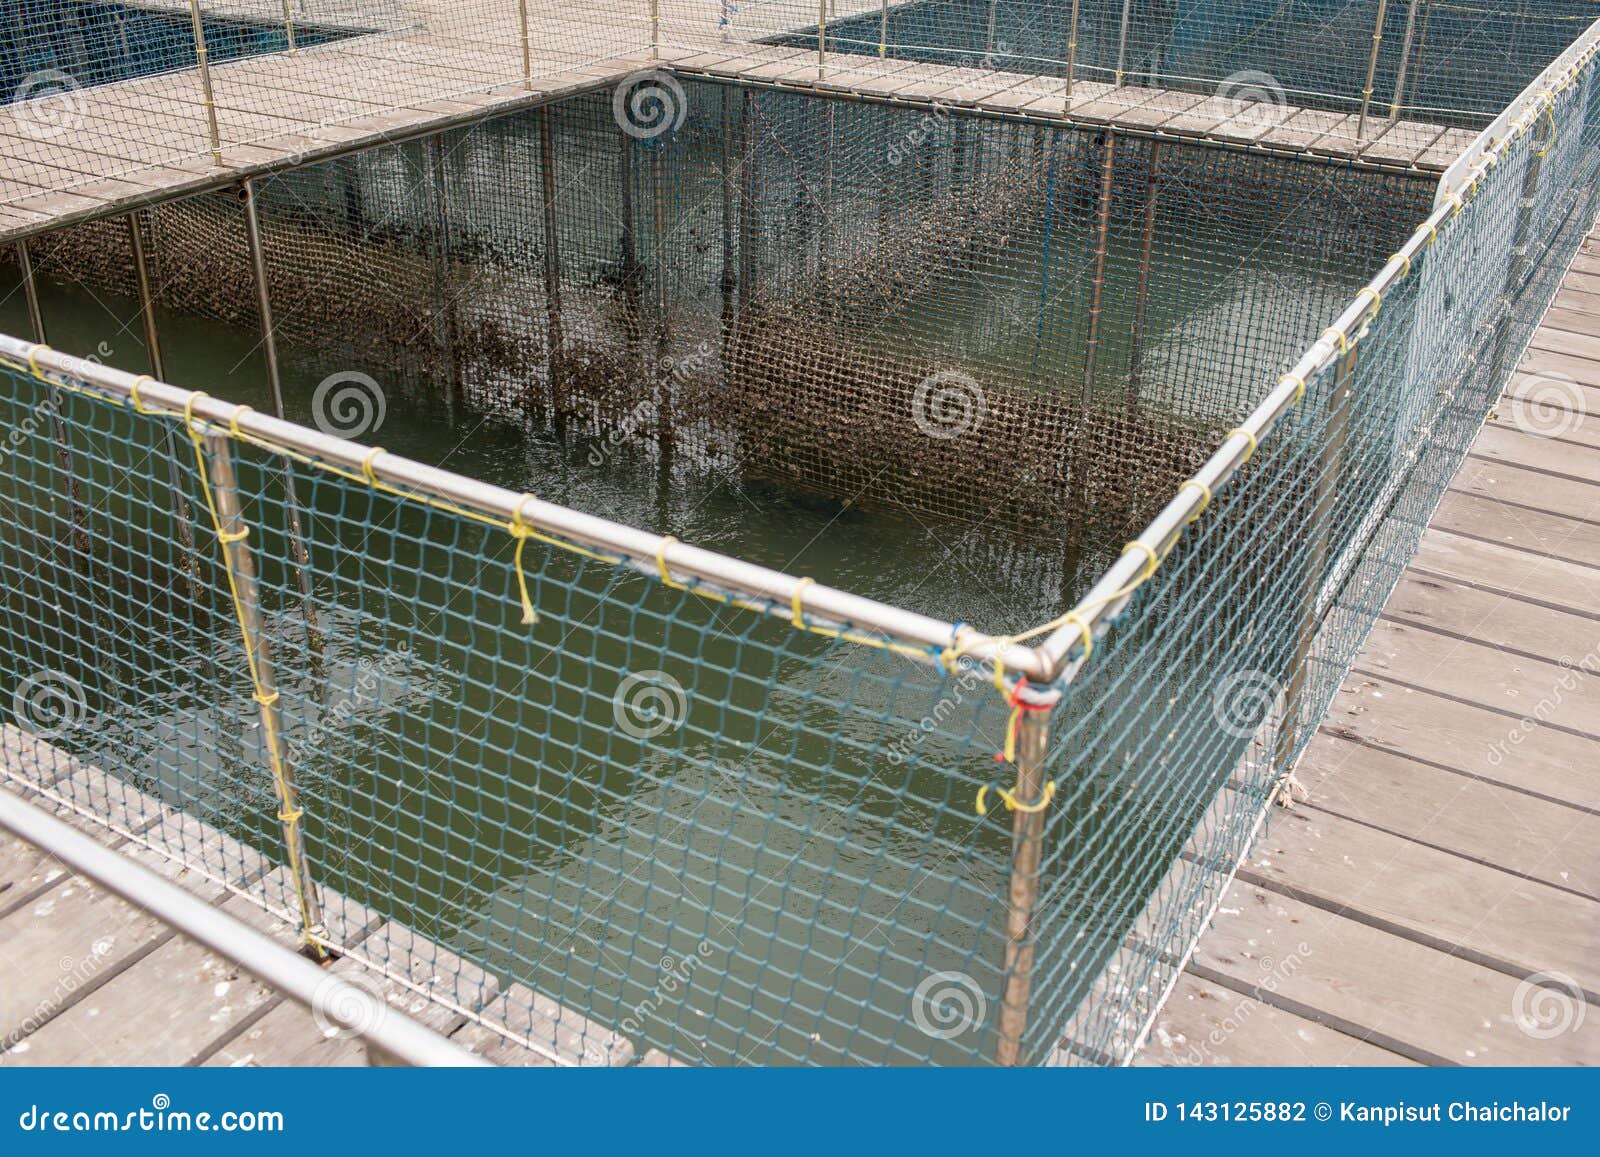 Fish Cage Floating in River Use for Raising Fish, Built with Blue Plastic  Barrels, Iron Pipes, Wood Planks and Net. Stock Photo - Image of aquaculture,  fisherman: 143125882